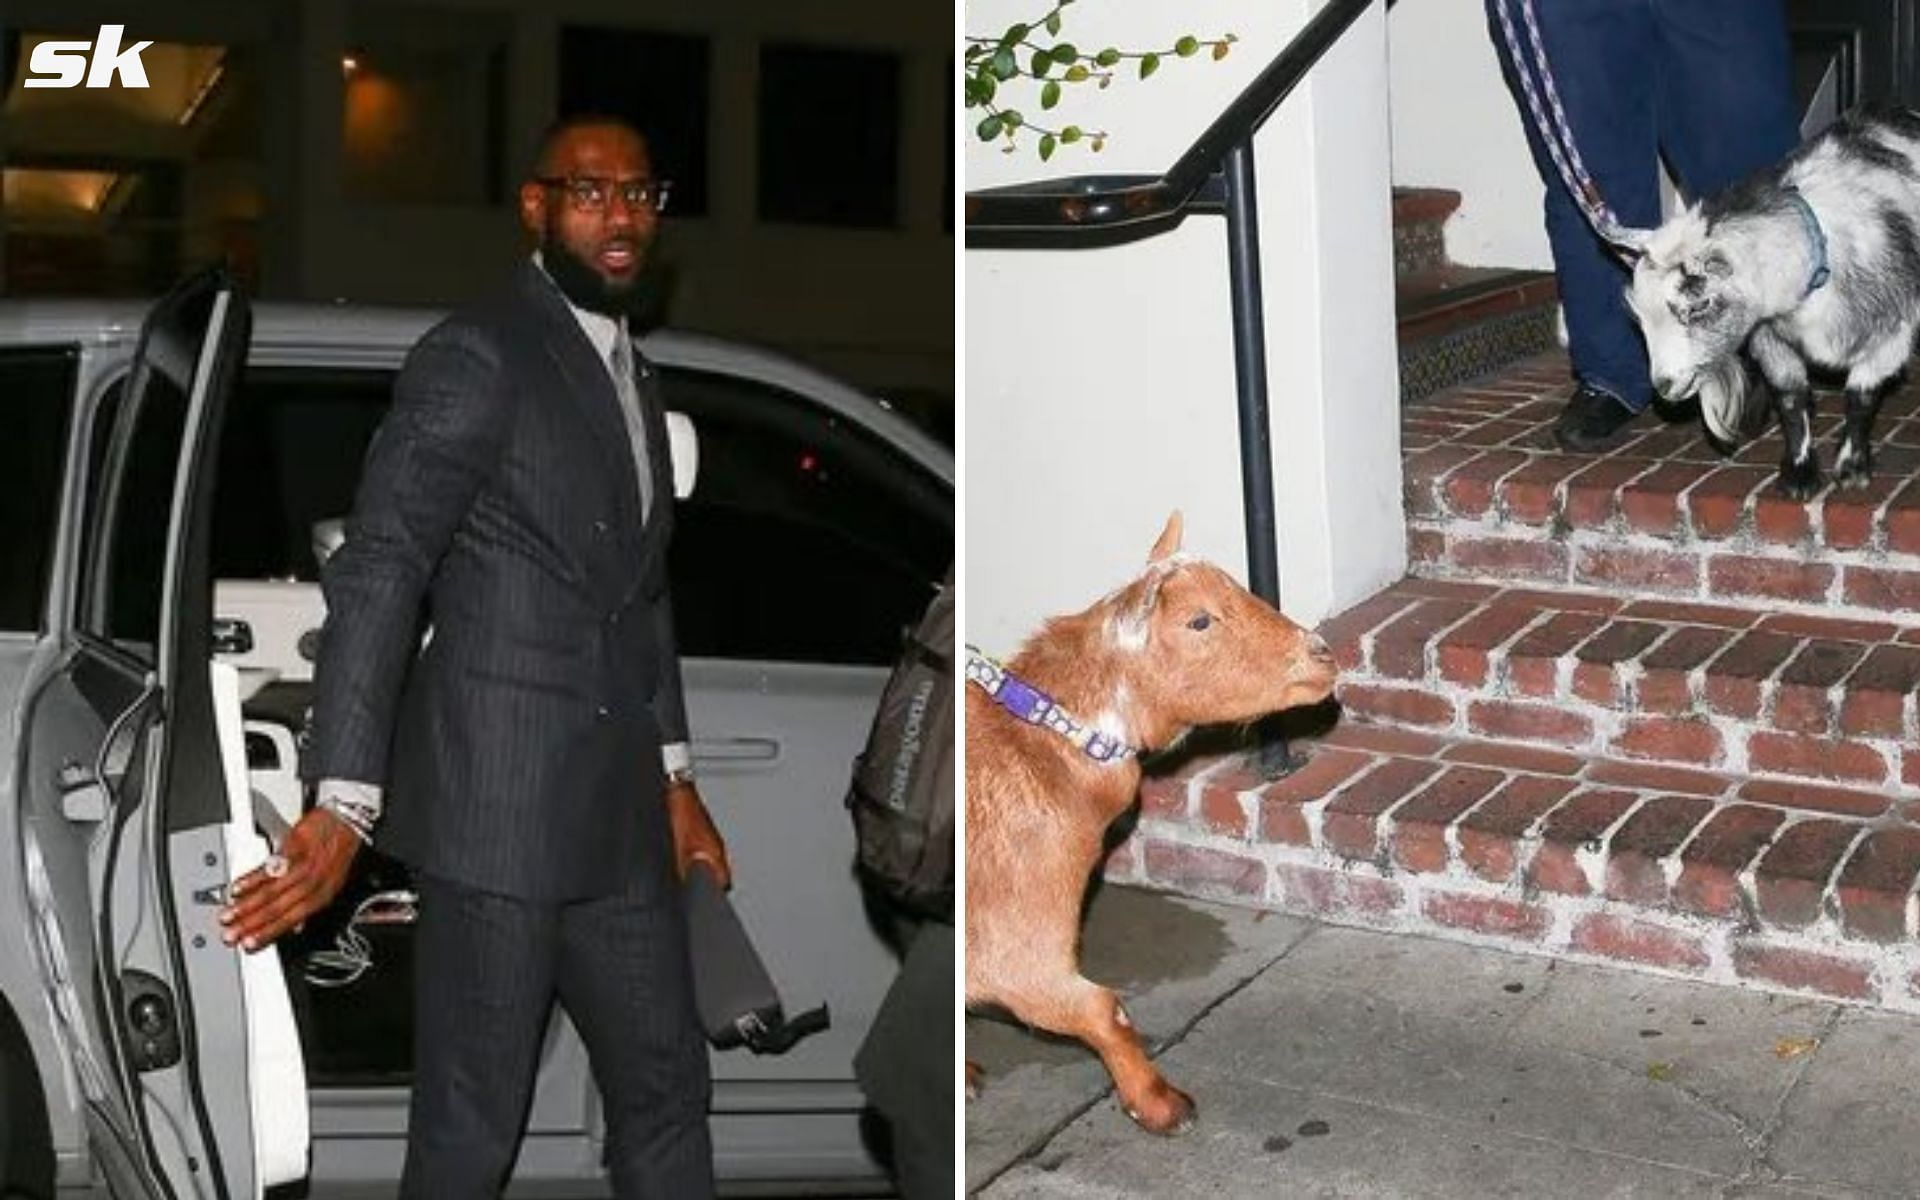 LeBron James made headlines for showing up at a dinner party with 2 goats - literally!